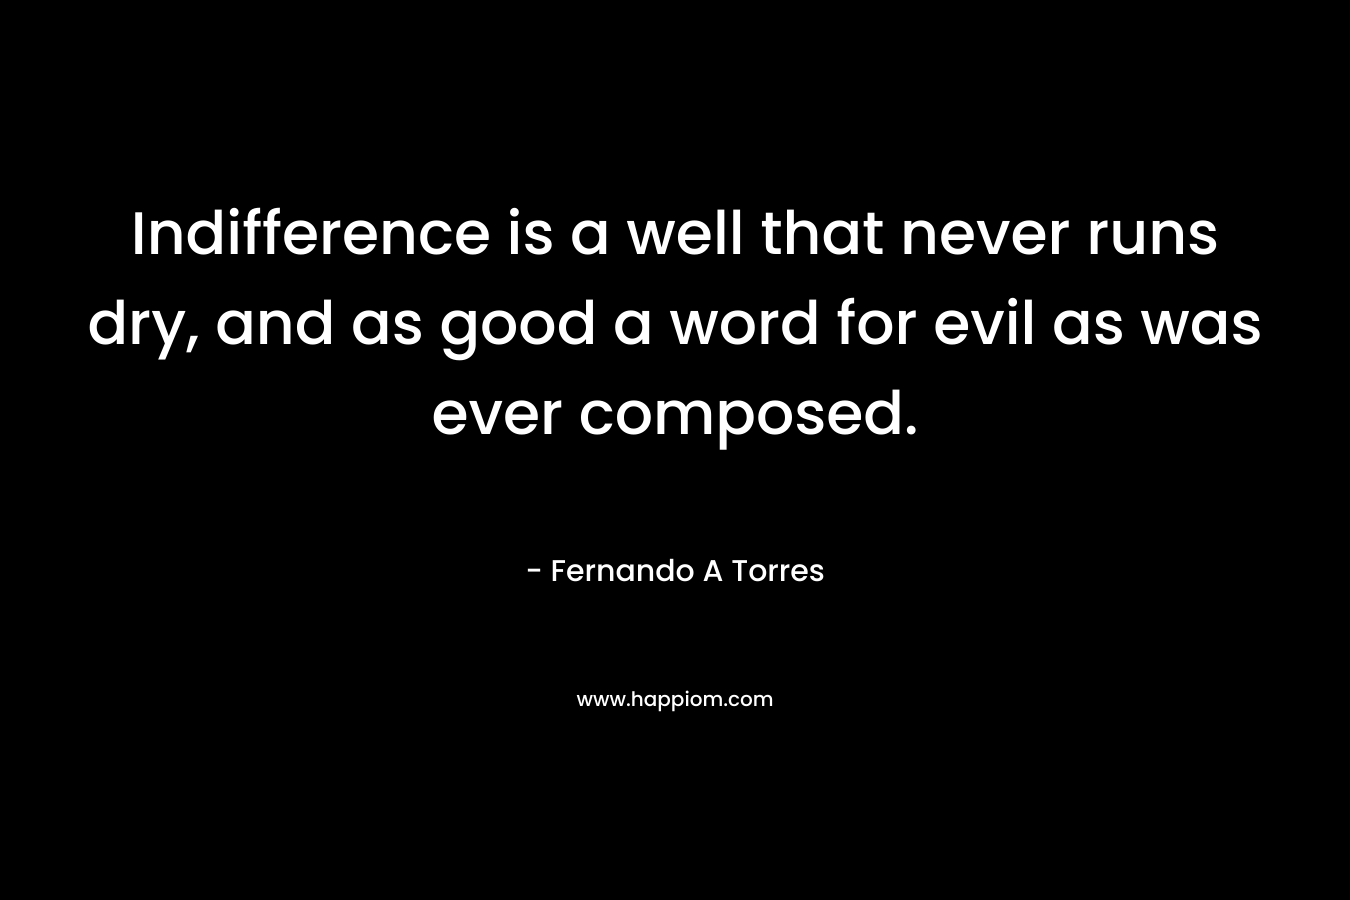 Indifference is a well that never runs dry, and as good a word for evil as was ever composed.